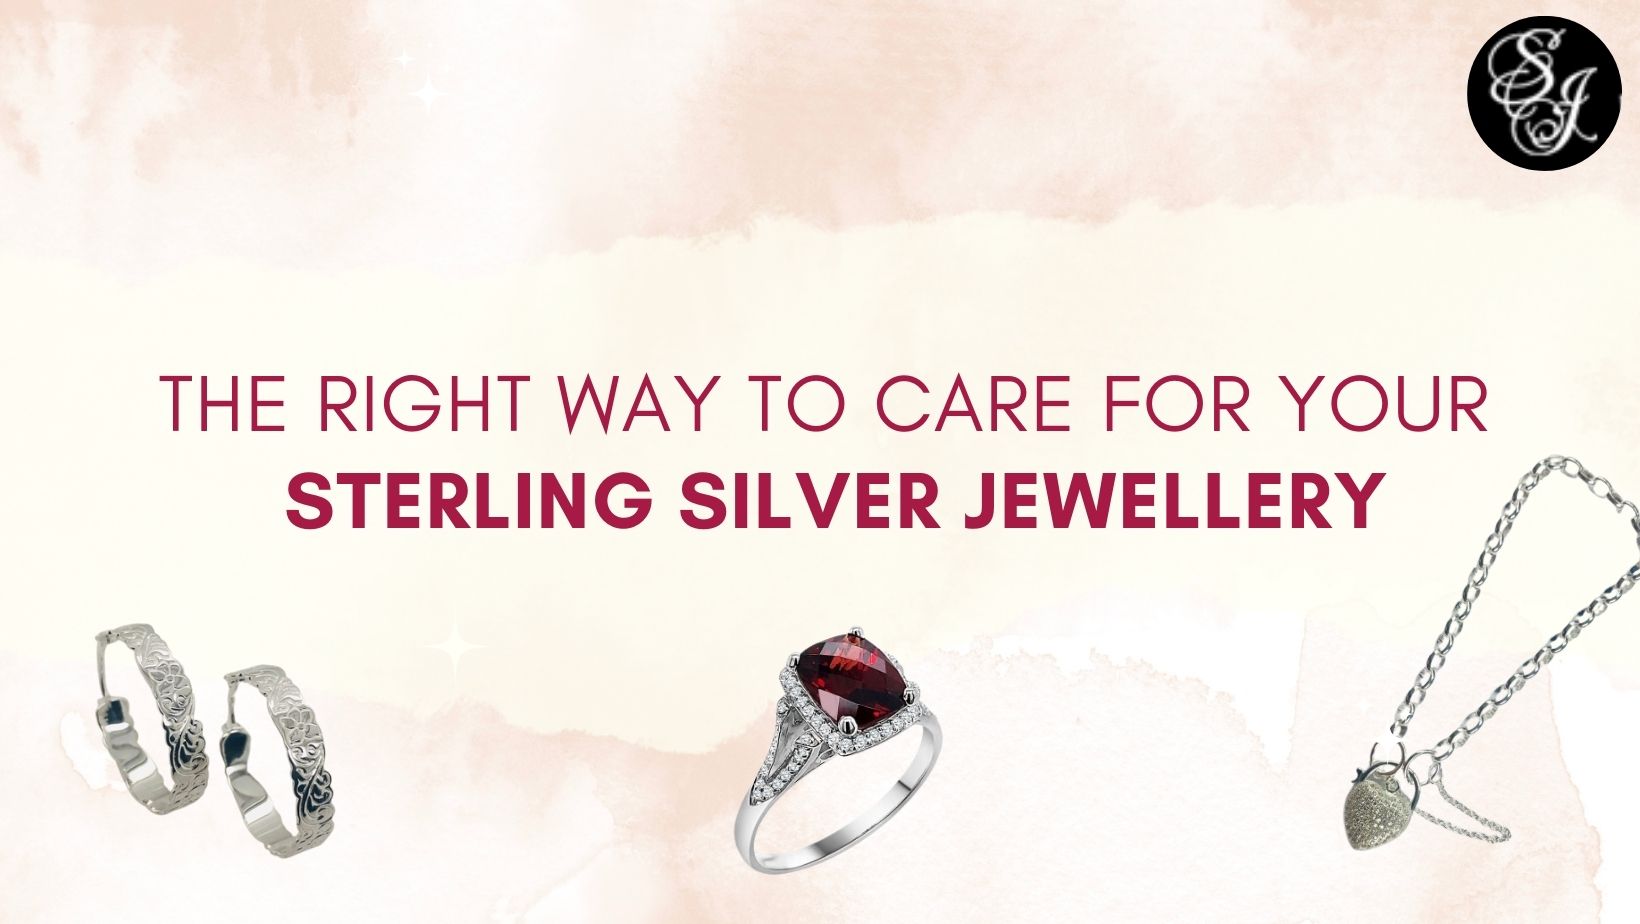 Adoring the Simple: Clean your sterling silver jewelry naturally